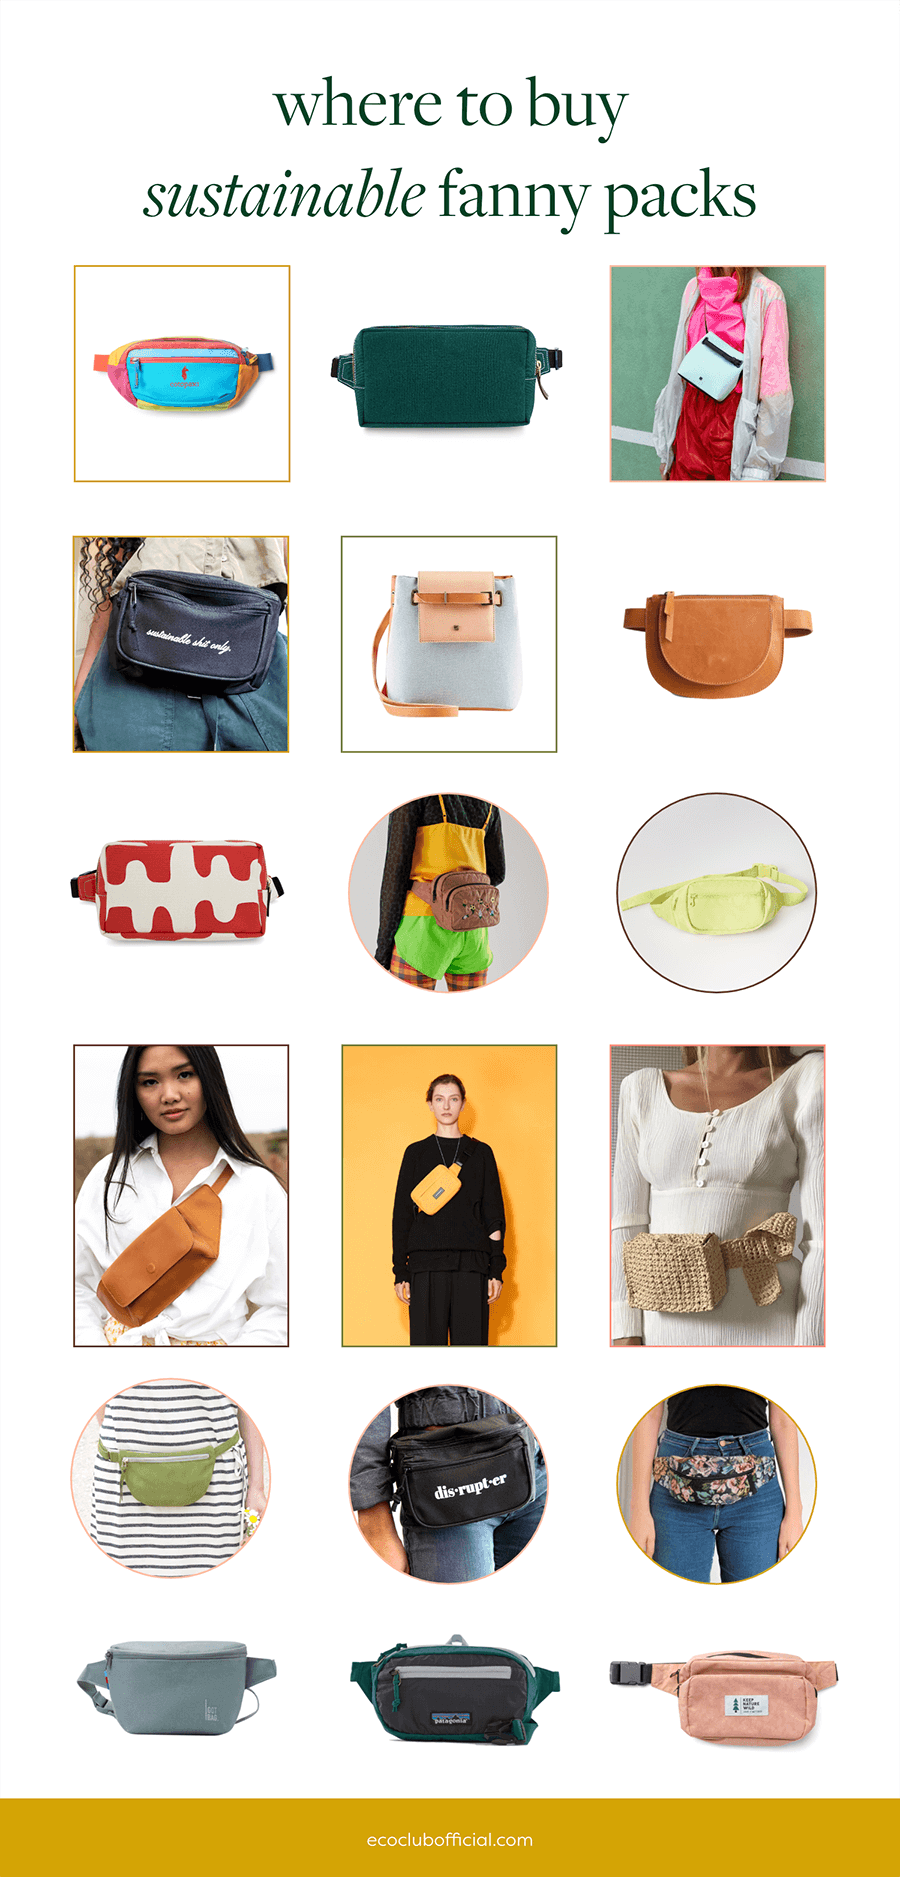 sustainable fanny pack collage featuring 18 belt bags | eco club